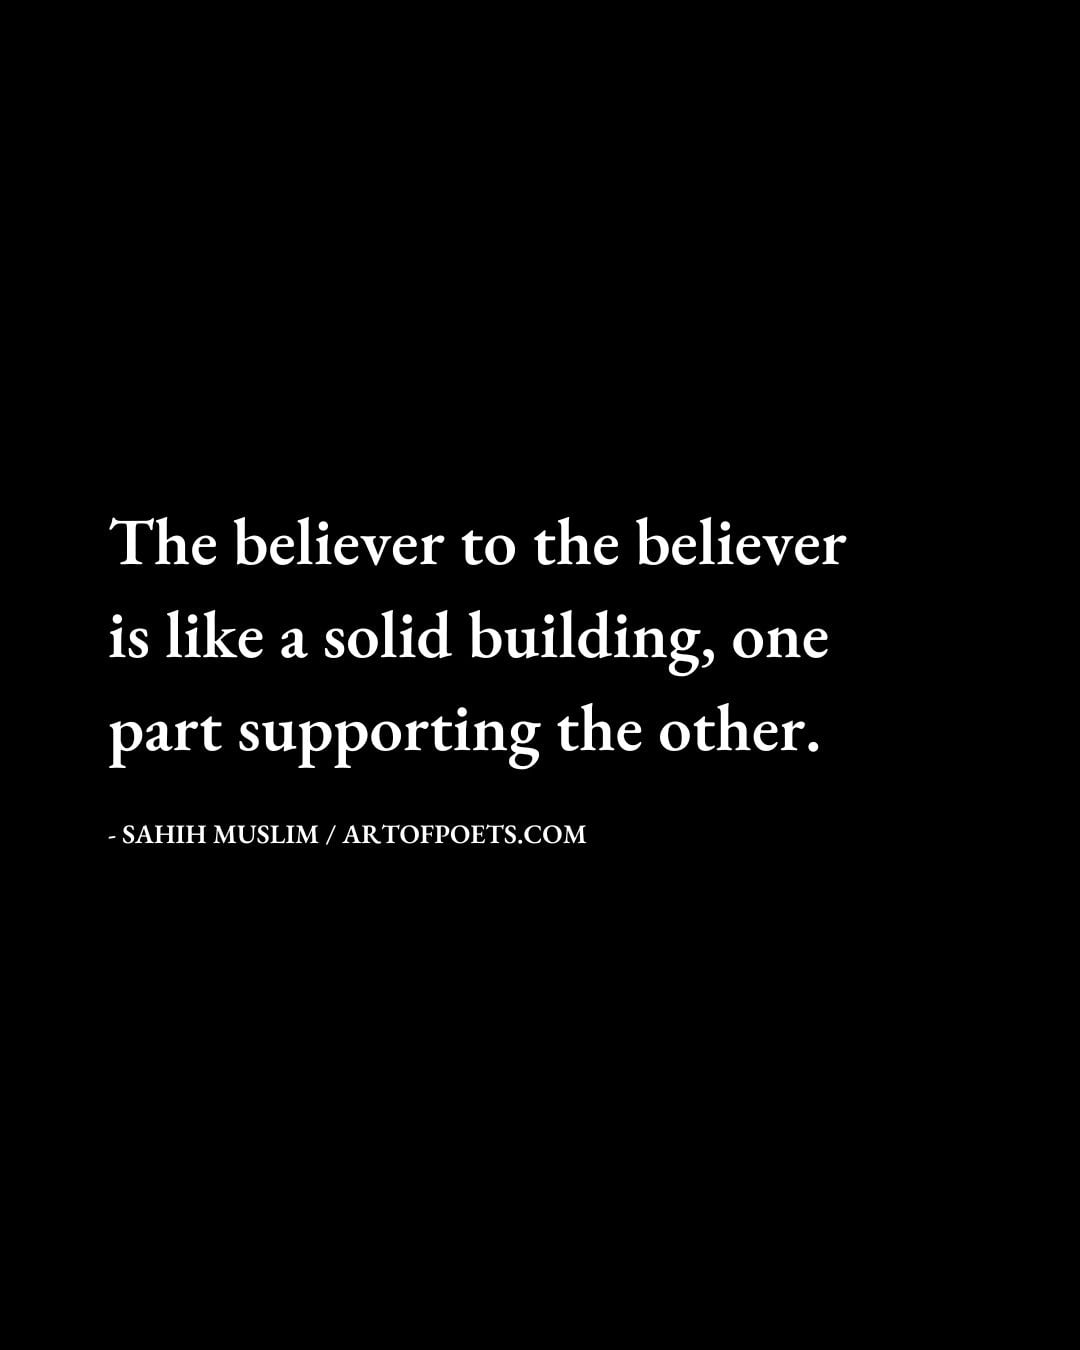 The believer to the believer is like a solid building one part supporting the other